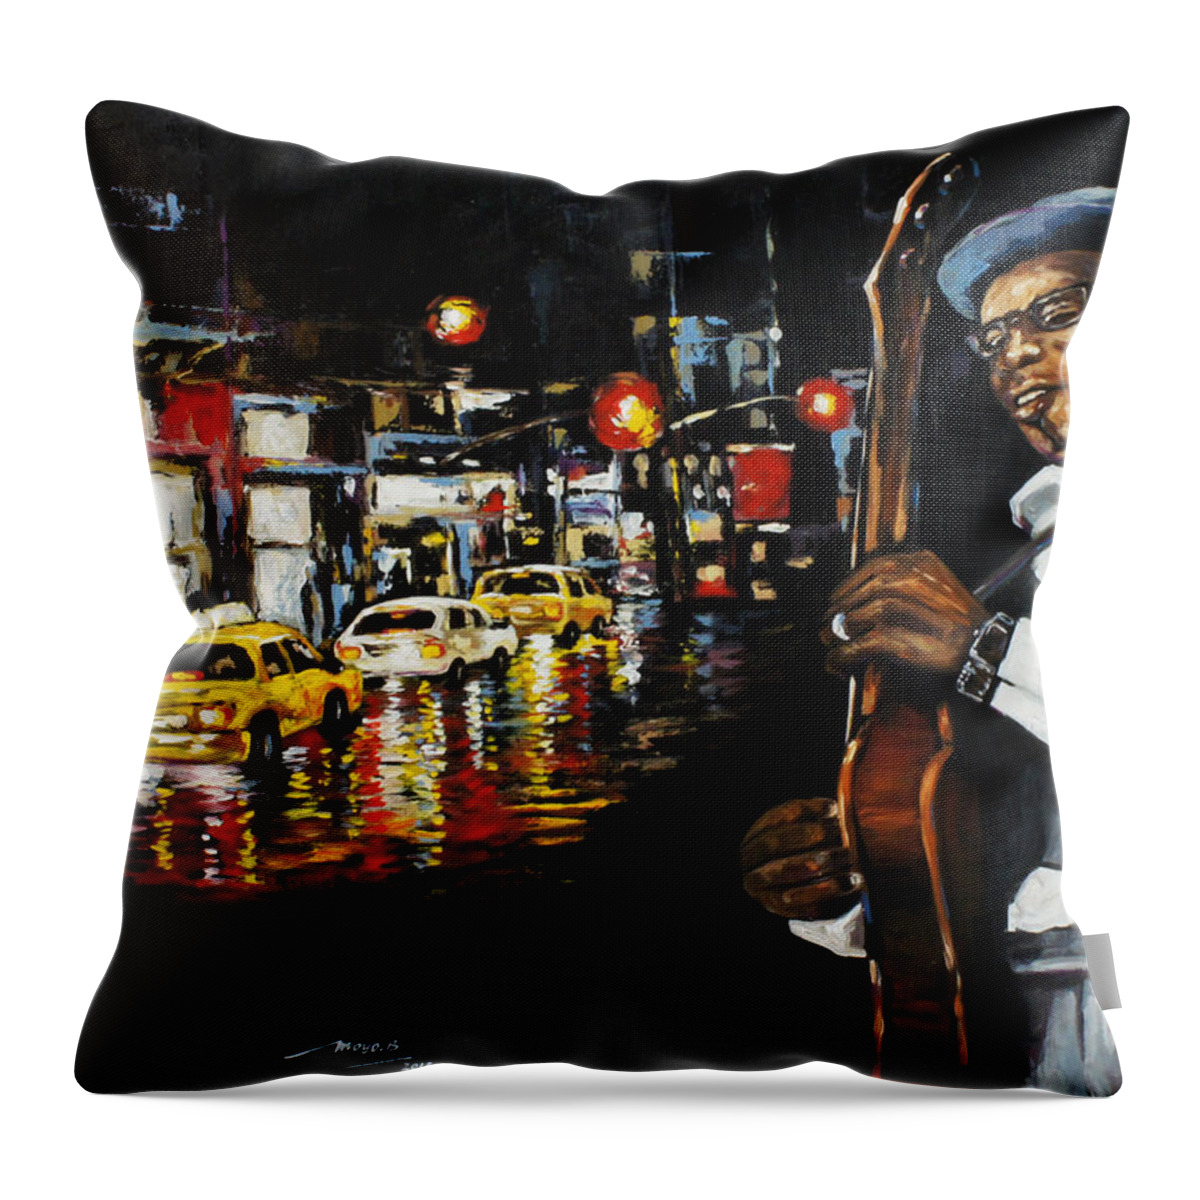 Bmo Throw Pillow featuring the painting New York Streets by Berthold Moyo